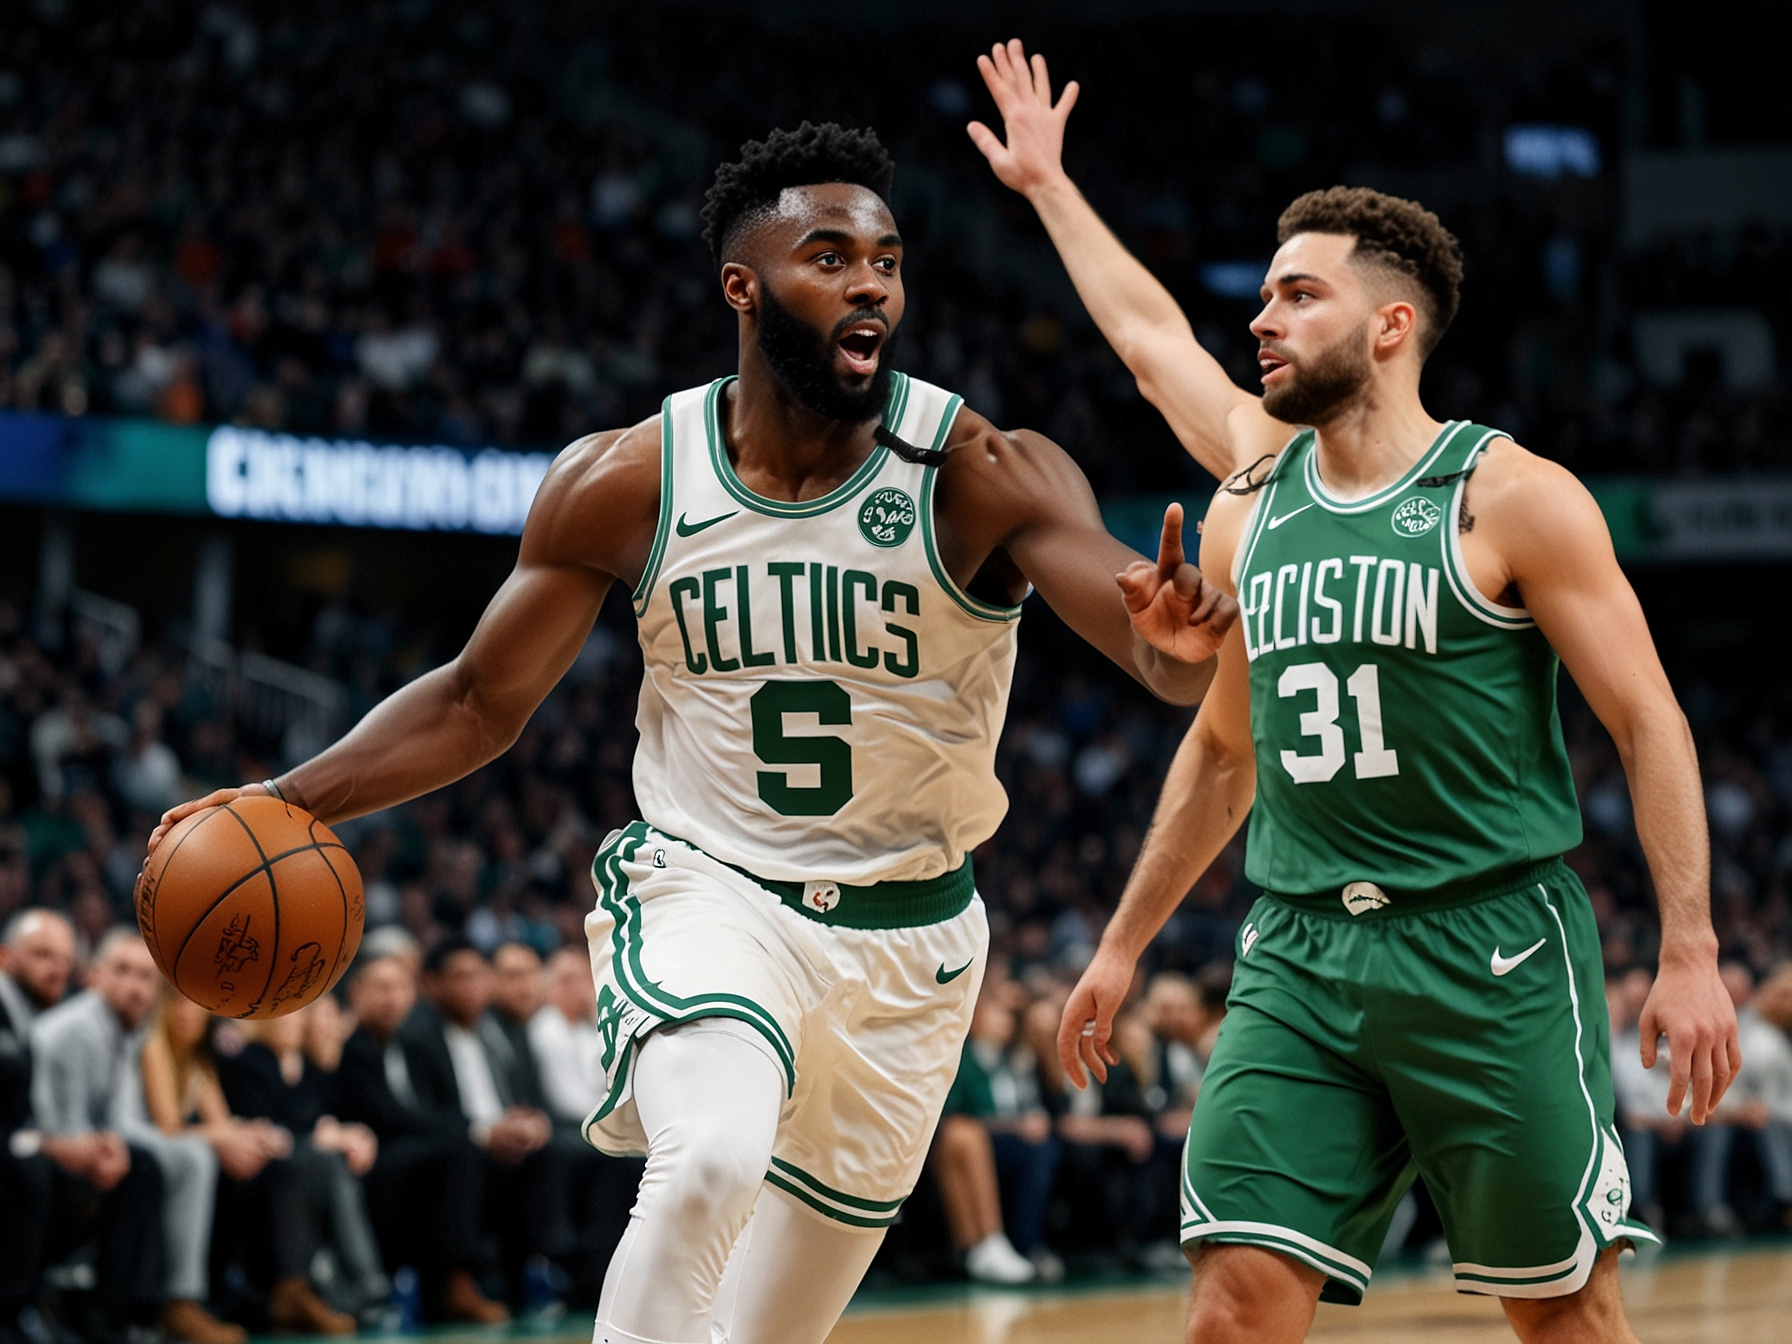 Jaylen Brown, named Finals MVP, leaps to make a crucial play. His 21 points and defensive efforts were key in securing the Celtics' 18th championship title against the Mavericks.